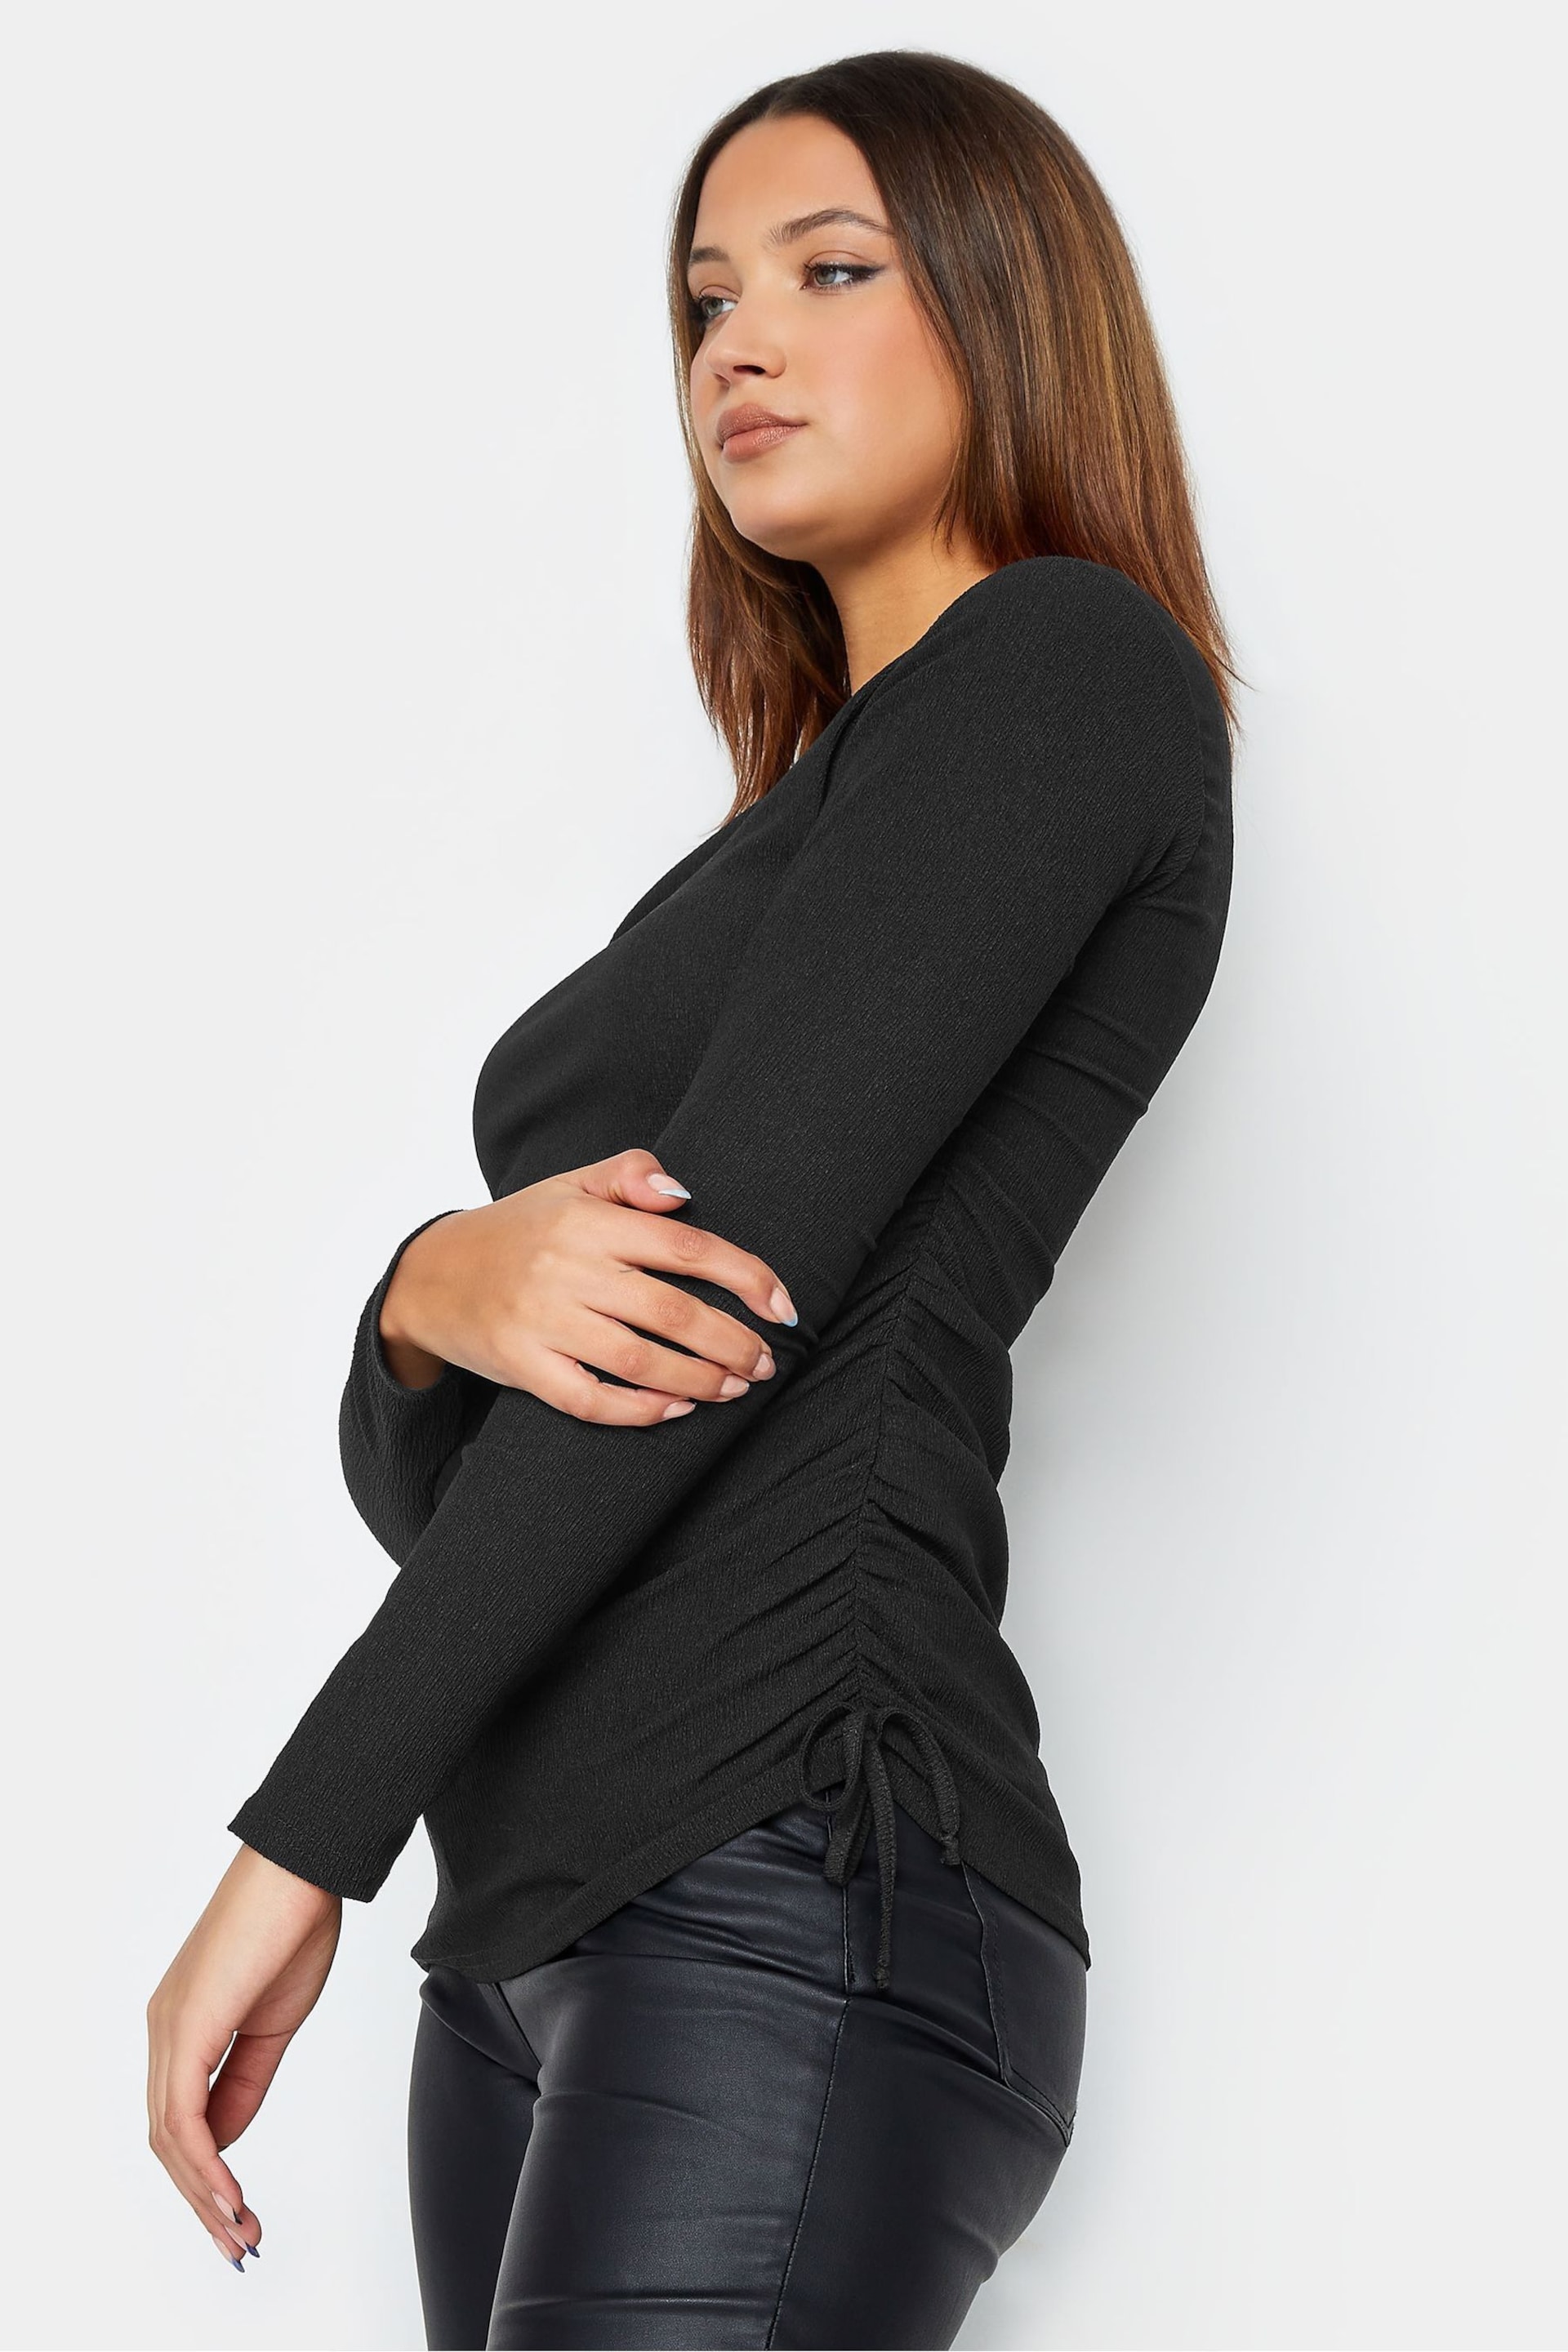 Long Tall Sally Black Textured Ruched Side Top - Image 4 of 4